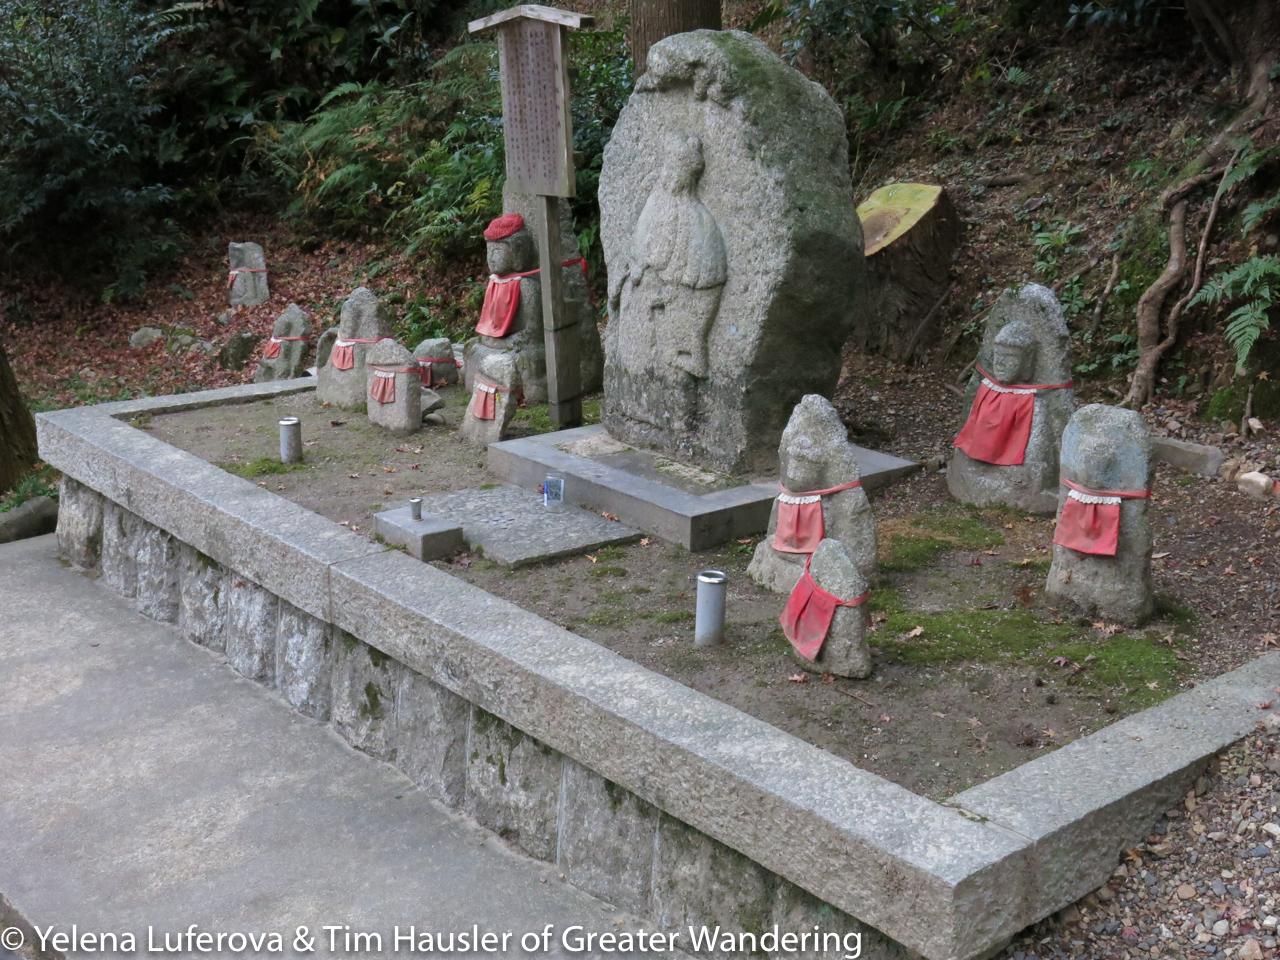 Shrine to protect lost children's spirits so they would protect ours